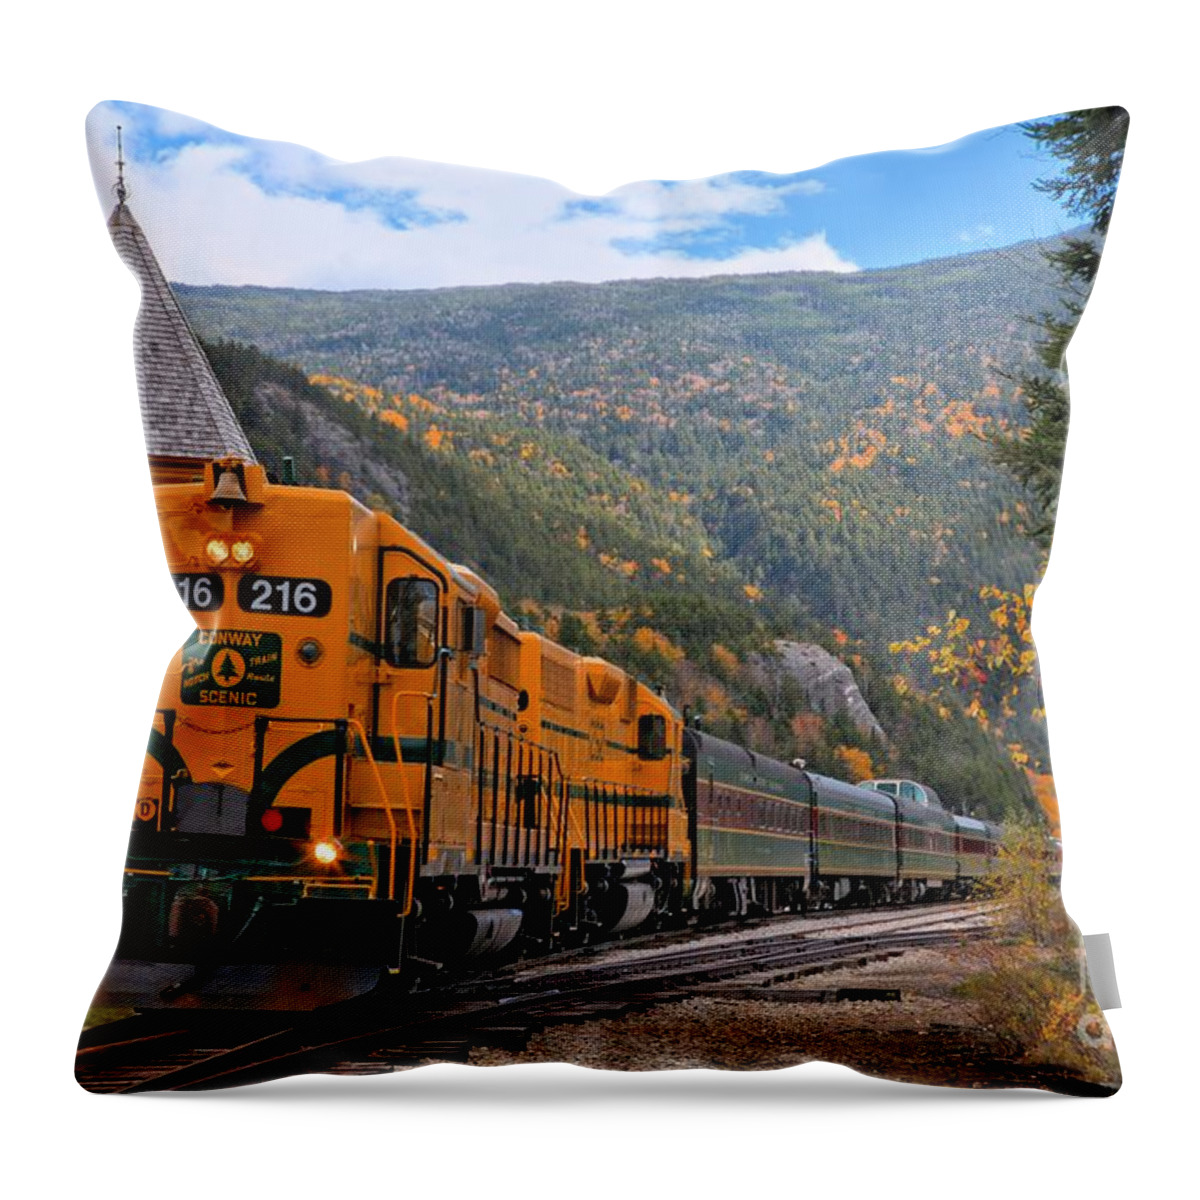 Conway Railroad Throw Pillow featuring the photograph Crawford Notch Train Depot by Adam Jewell